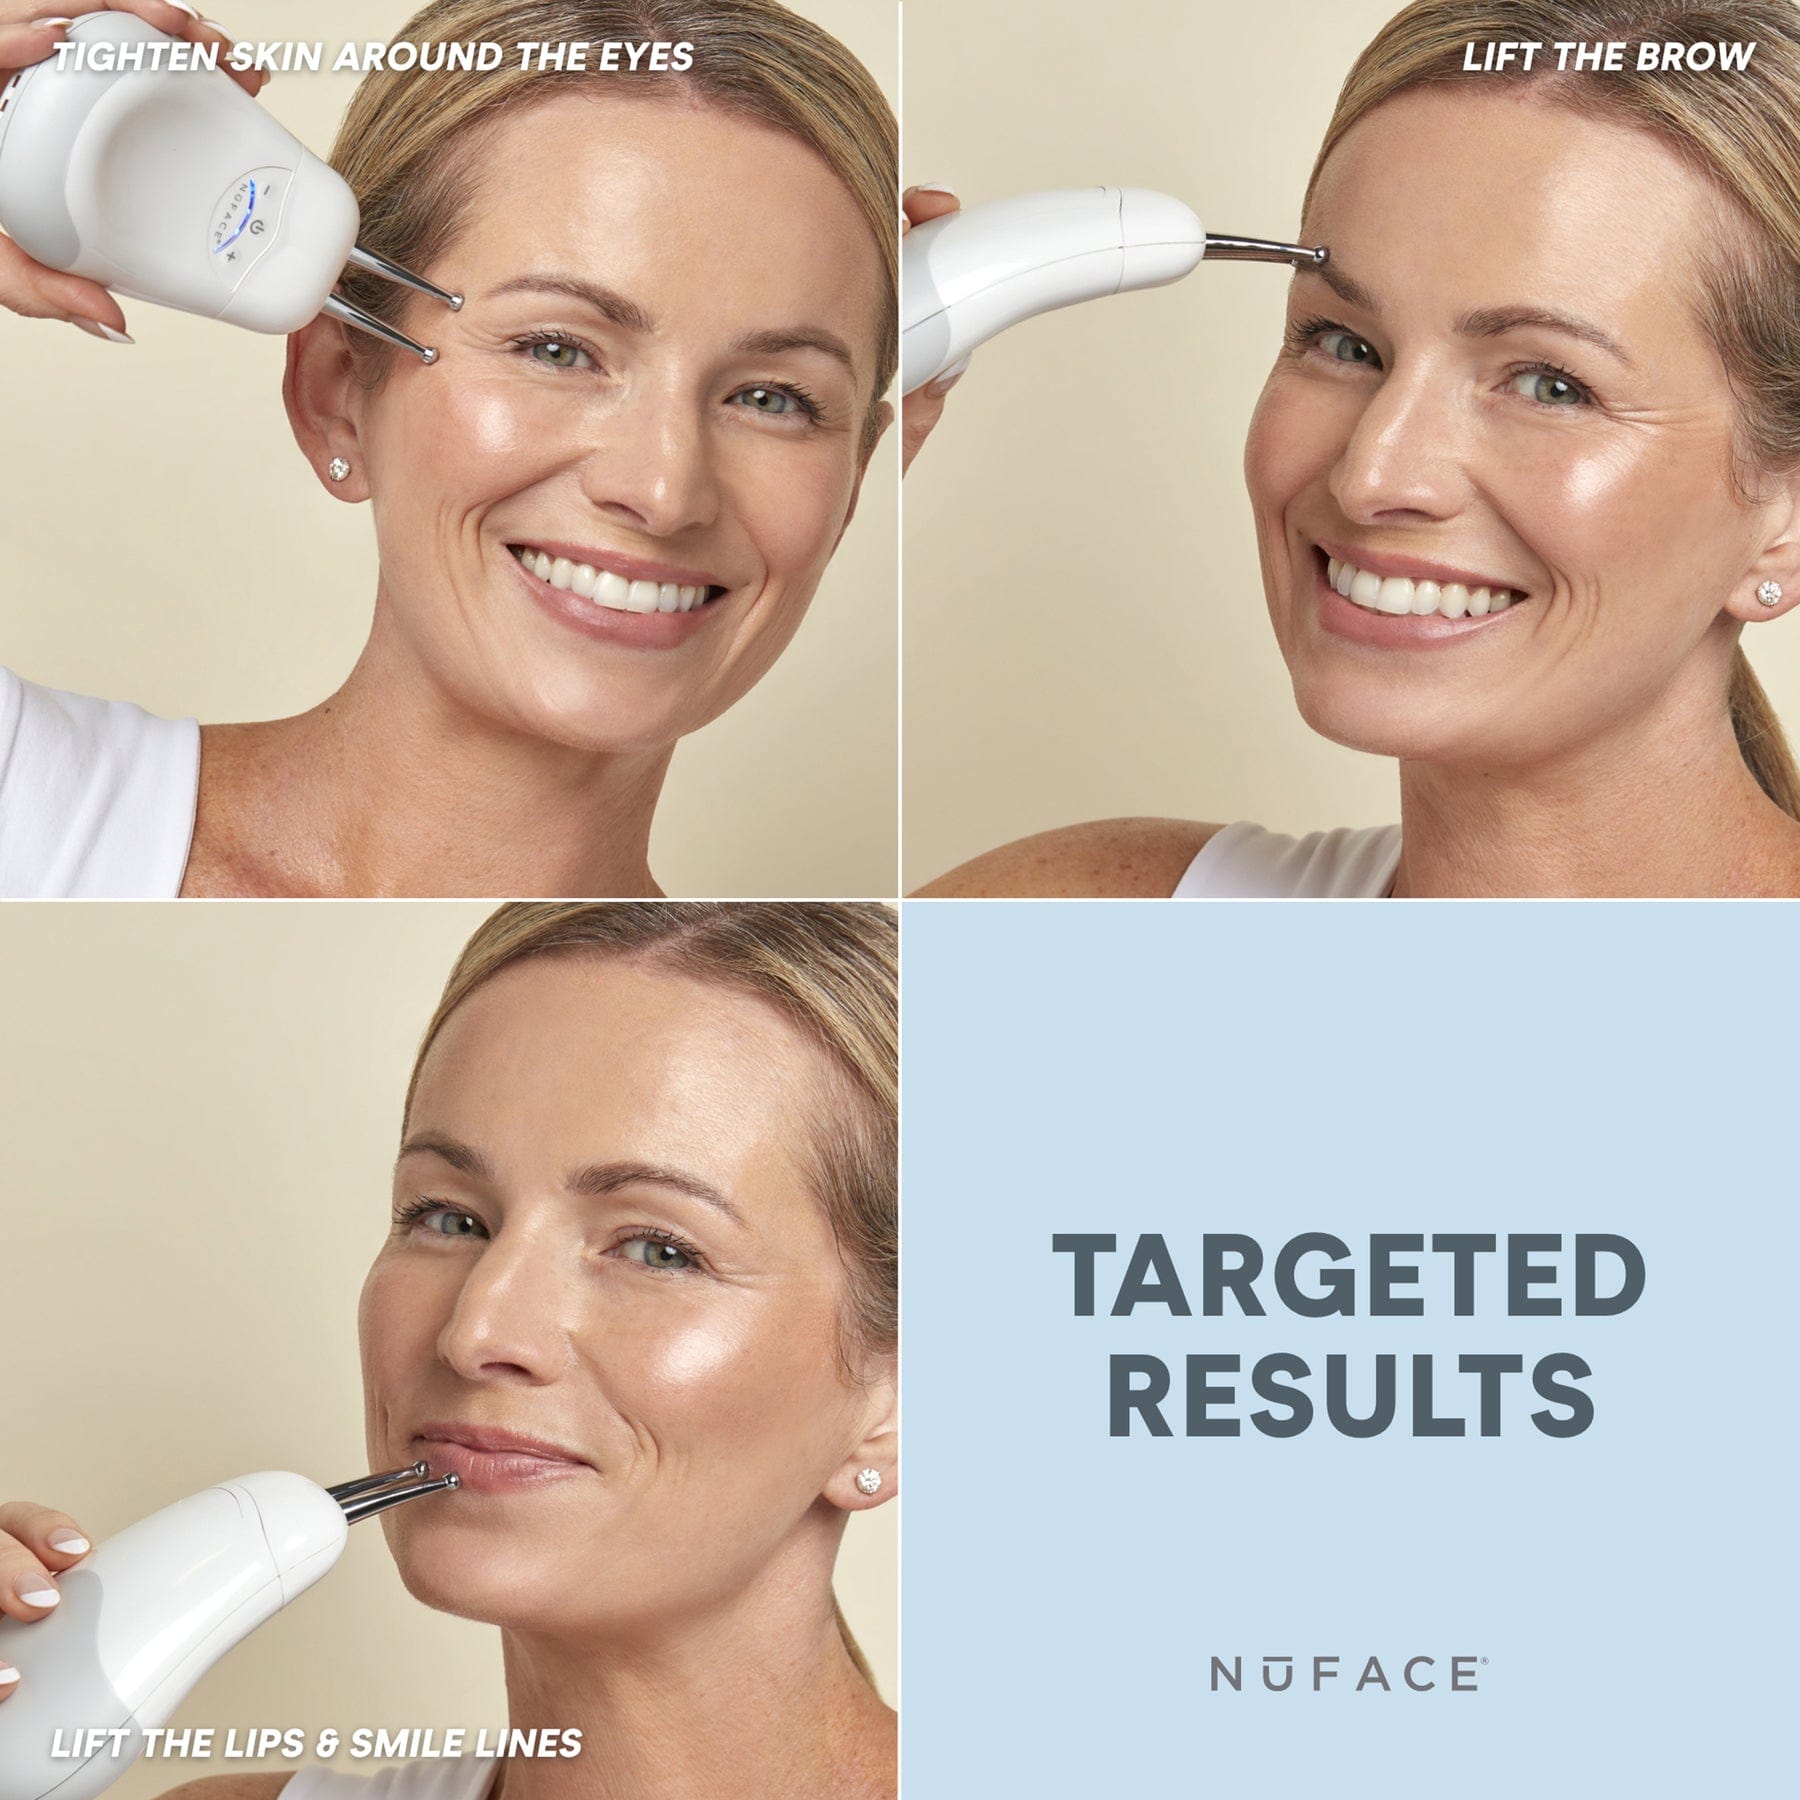 NuFACE Trinity® Effective Lip & Eye Attachment - Smile Lines & Eye Wrinkles